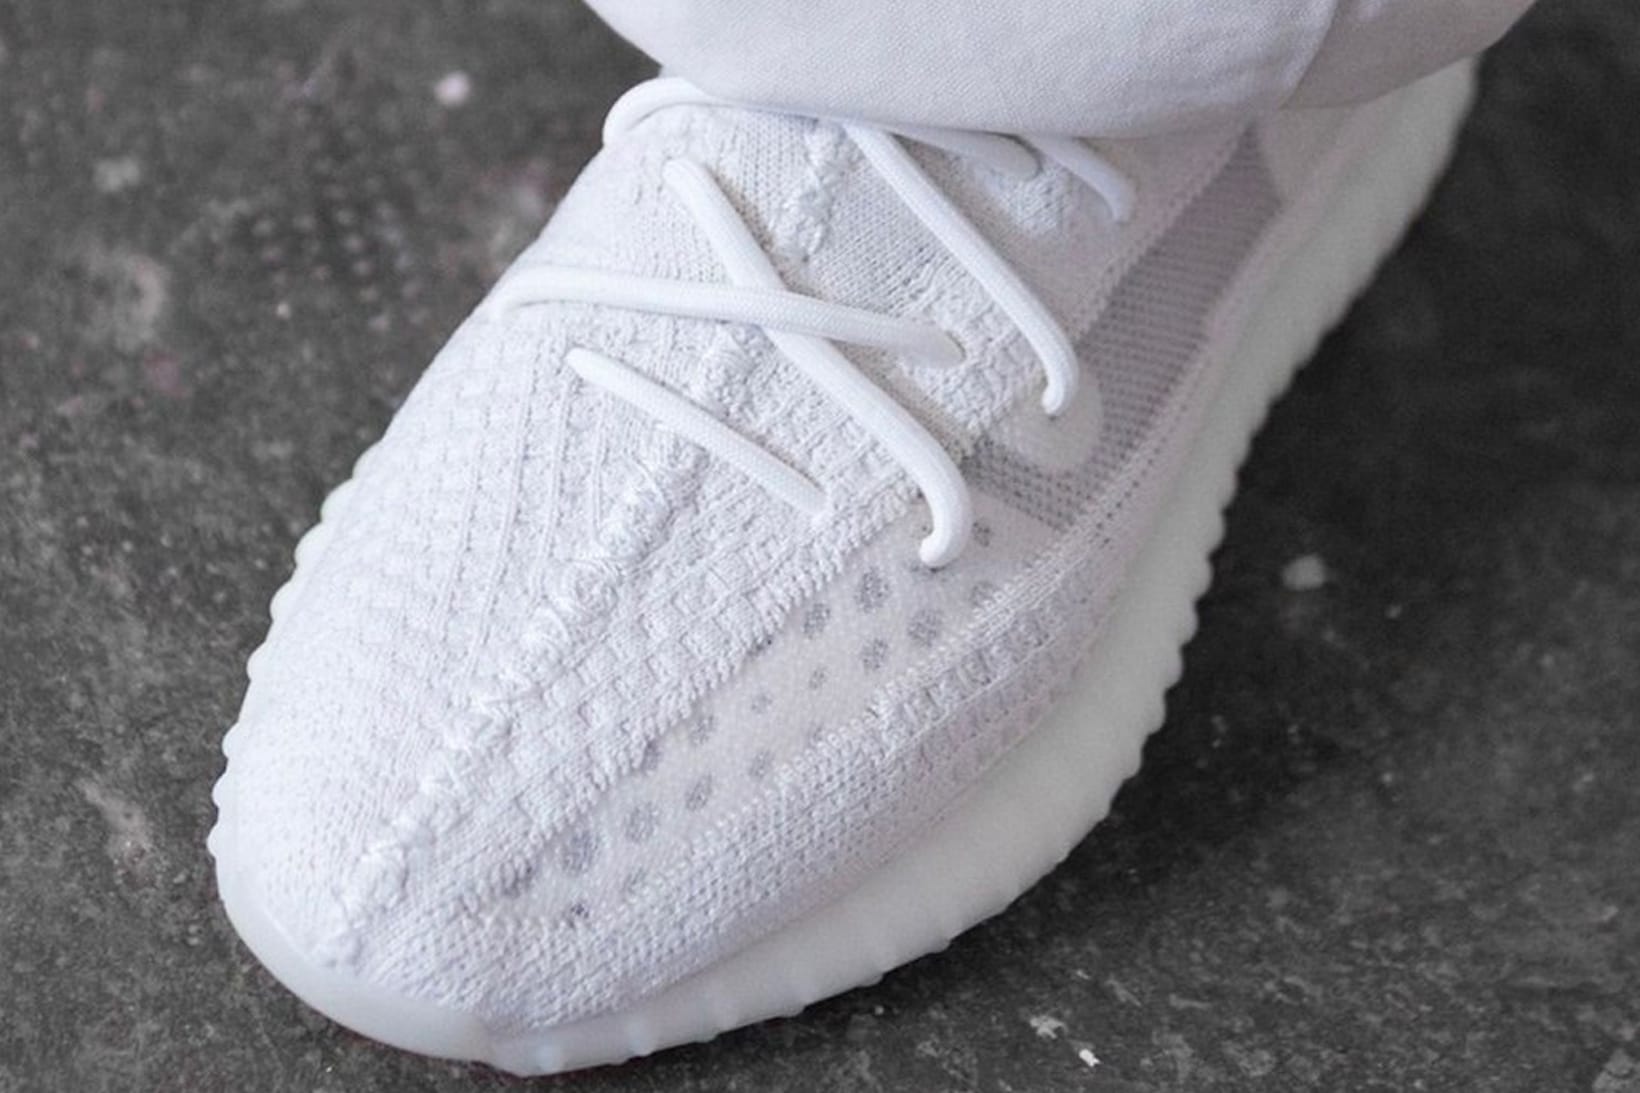 Look For The adidas Yeezy Boost 350 V2 Cloud White Reflective Soon •  KicksOnFire.com